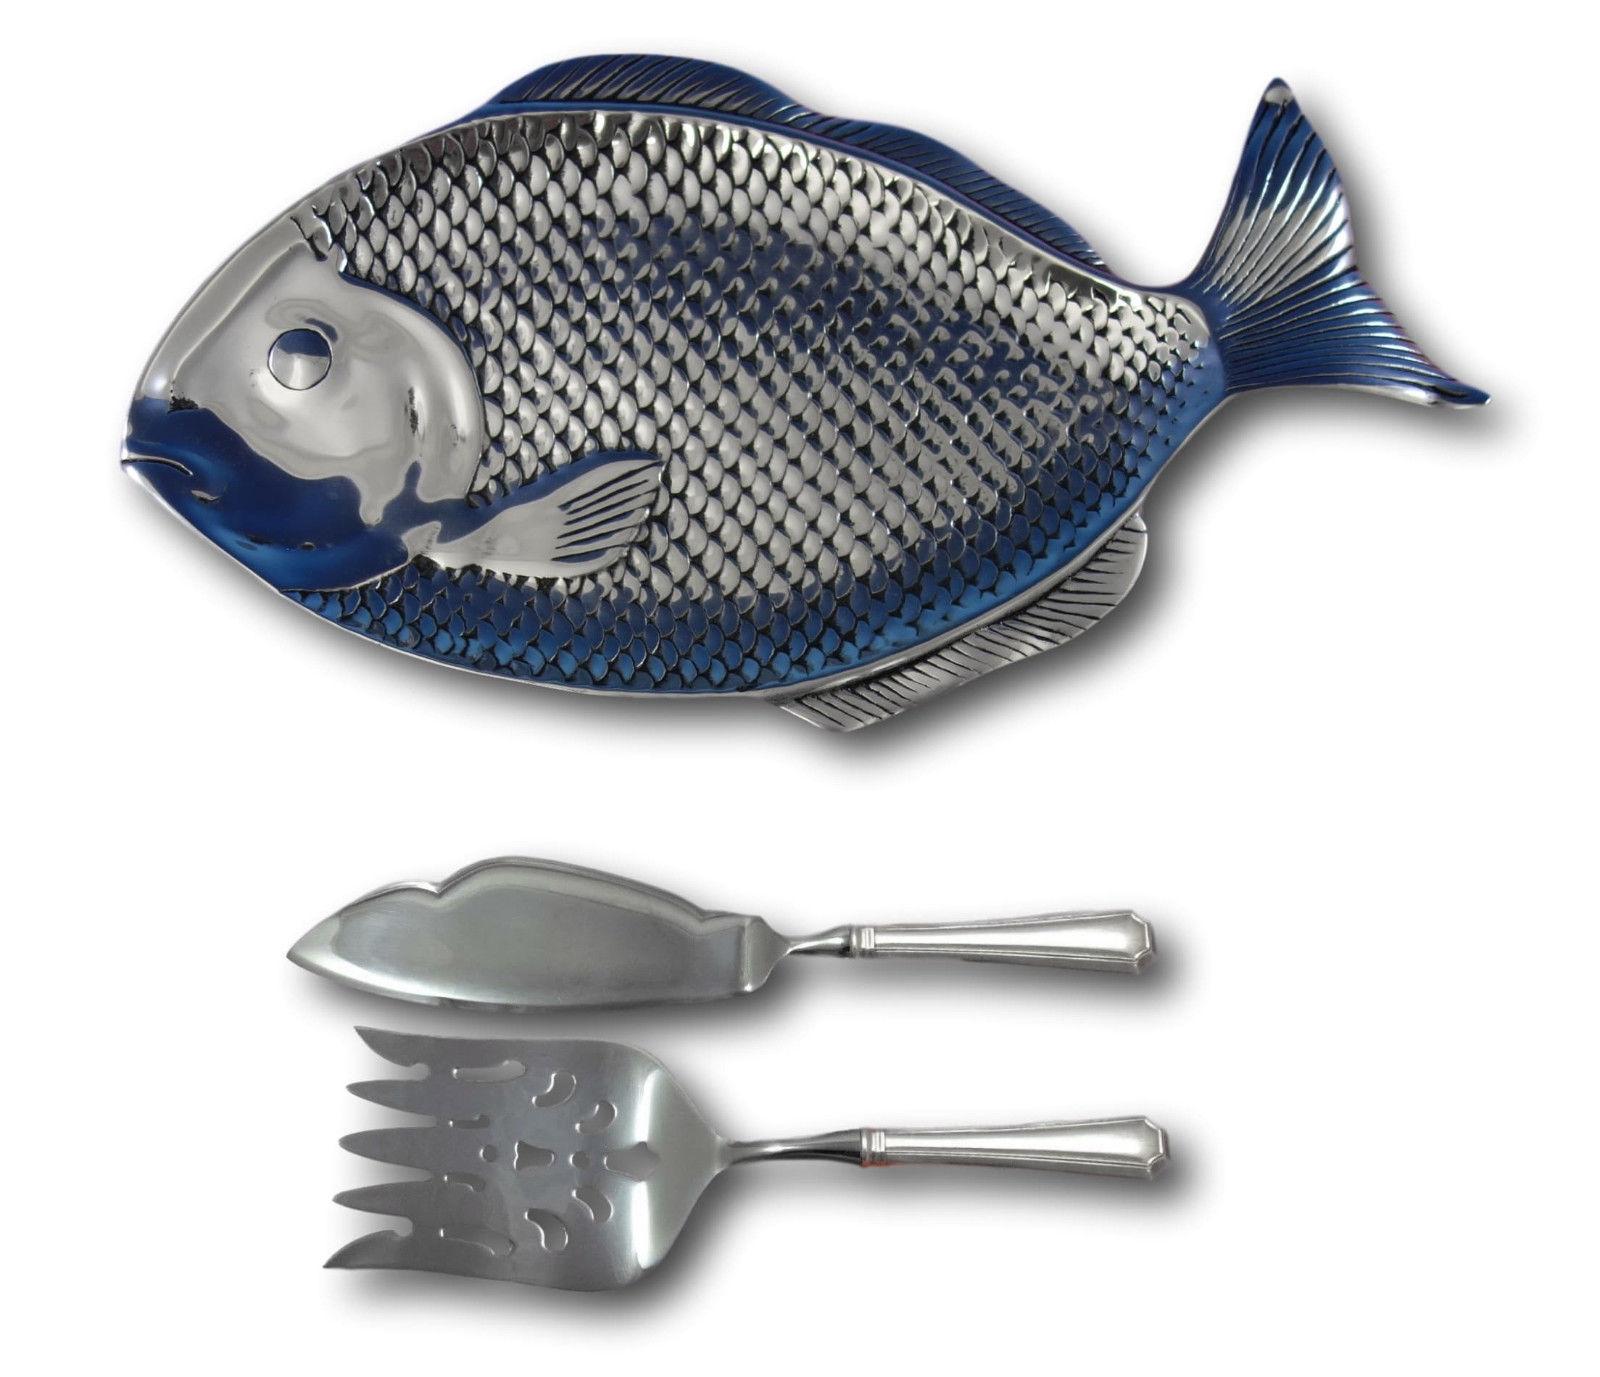 Wilton Armetale large fish tray and 2-pc fairfax by Gorham sterling serving set.

3-piece Fish serving set including: Wilton Armetale Sea Life Large Fish Tray (New in box) and 2-pc custom fairfax by Gorham fish serving set.
Details: 
One brand new